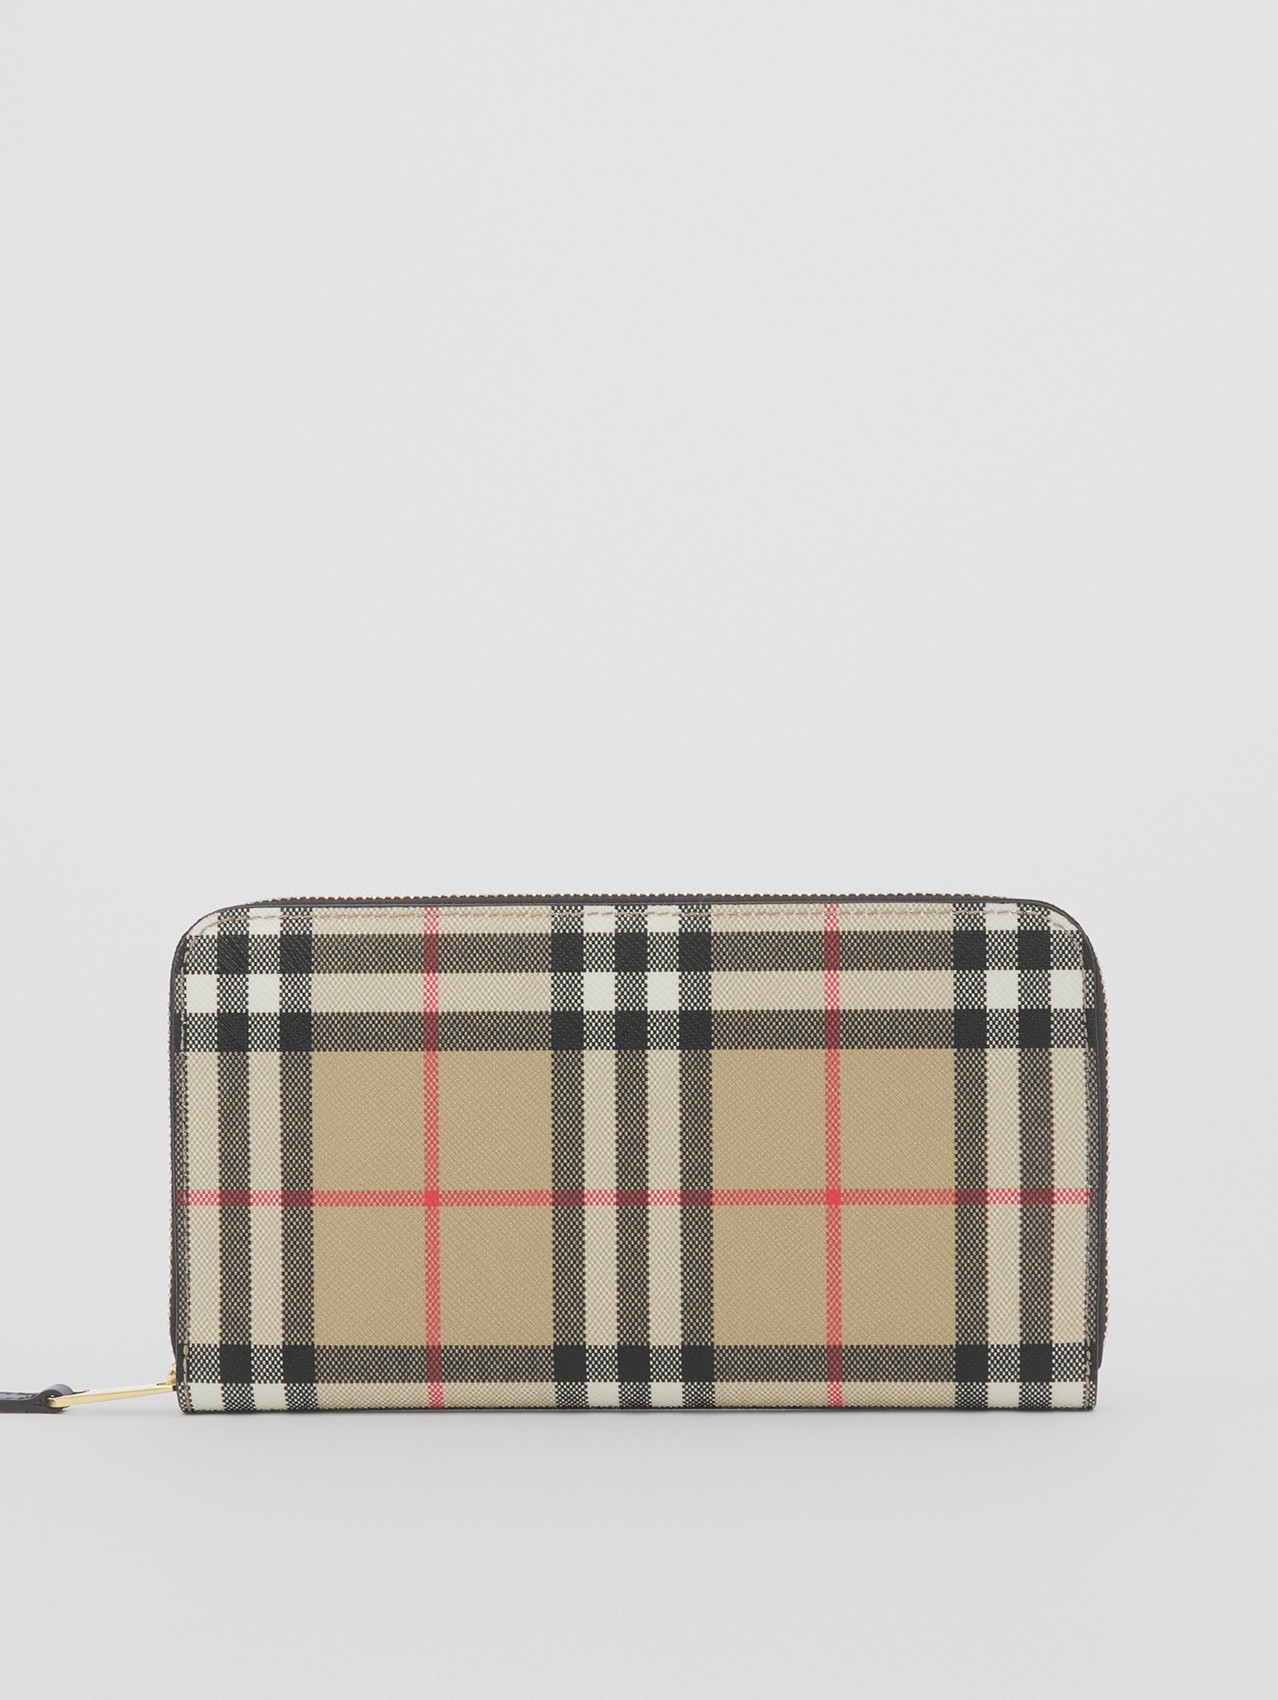 Vintage Check and Leather Ziparound Wallet in Archive Beige/black